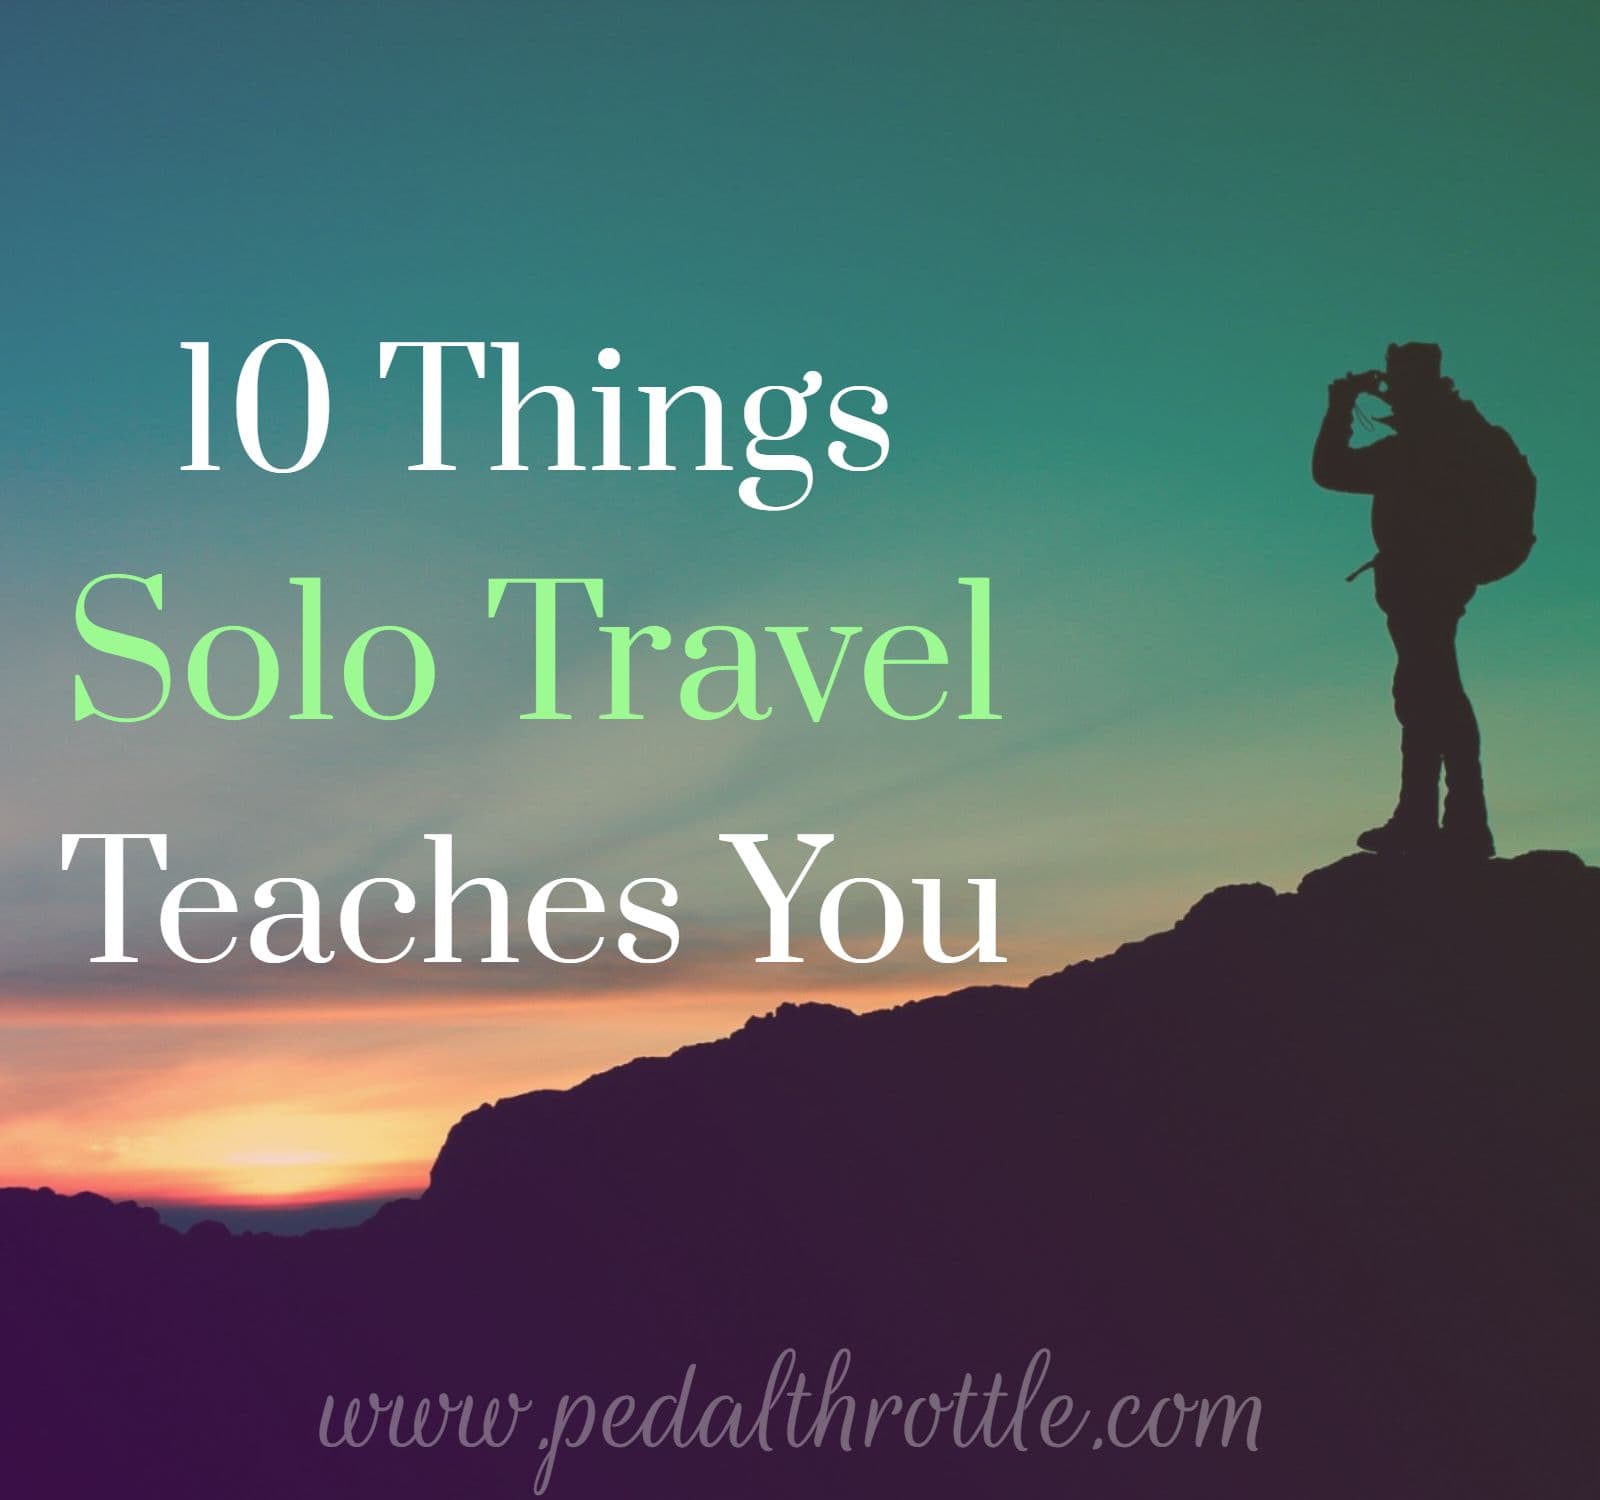 Benefits of solo traveling